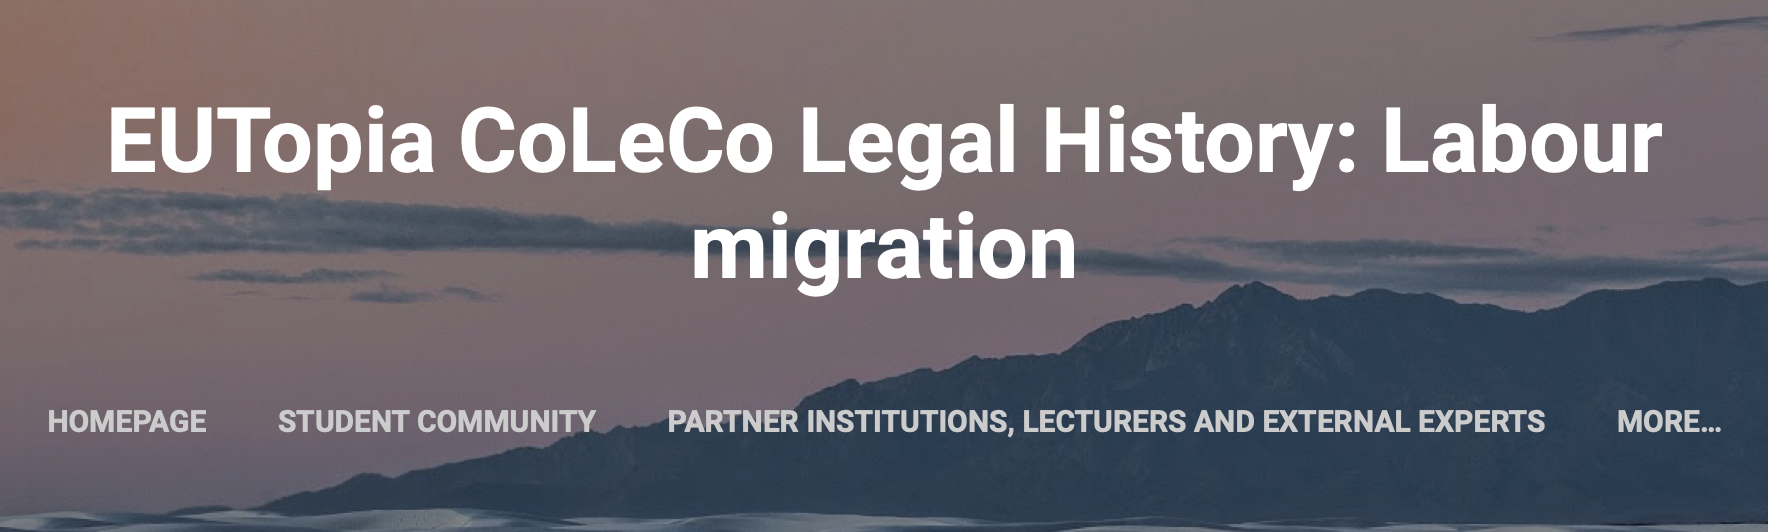 Learning Community in Action: Legal History transnational launch event